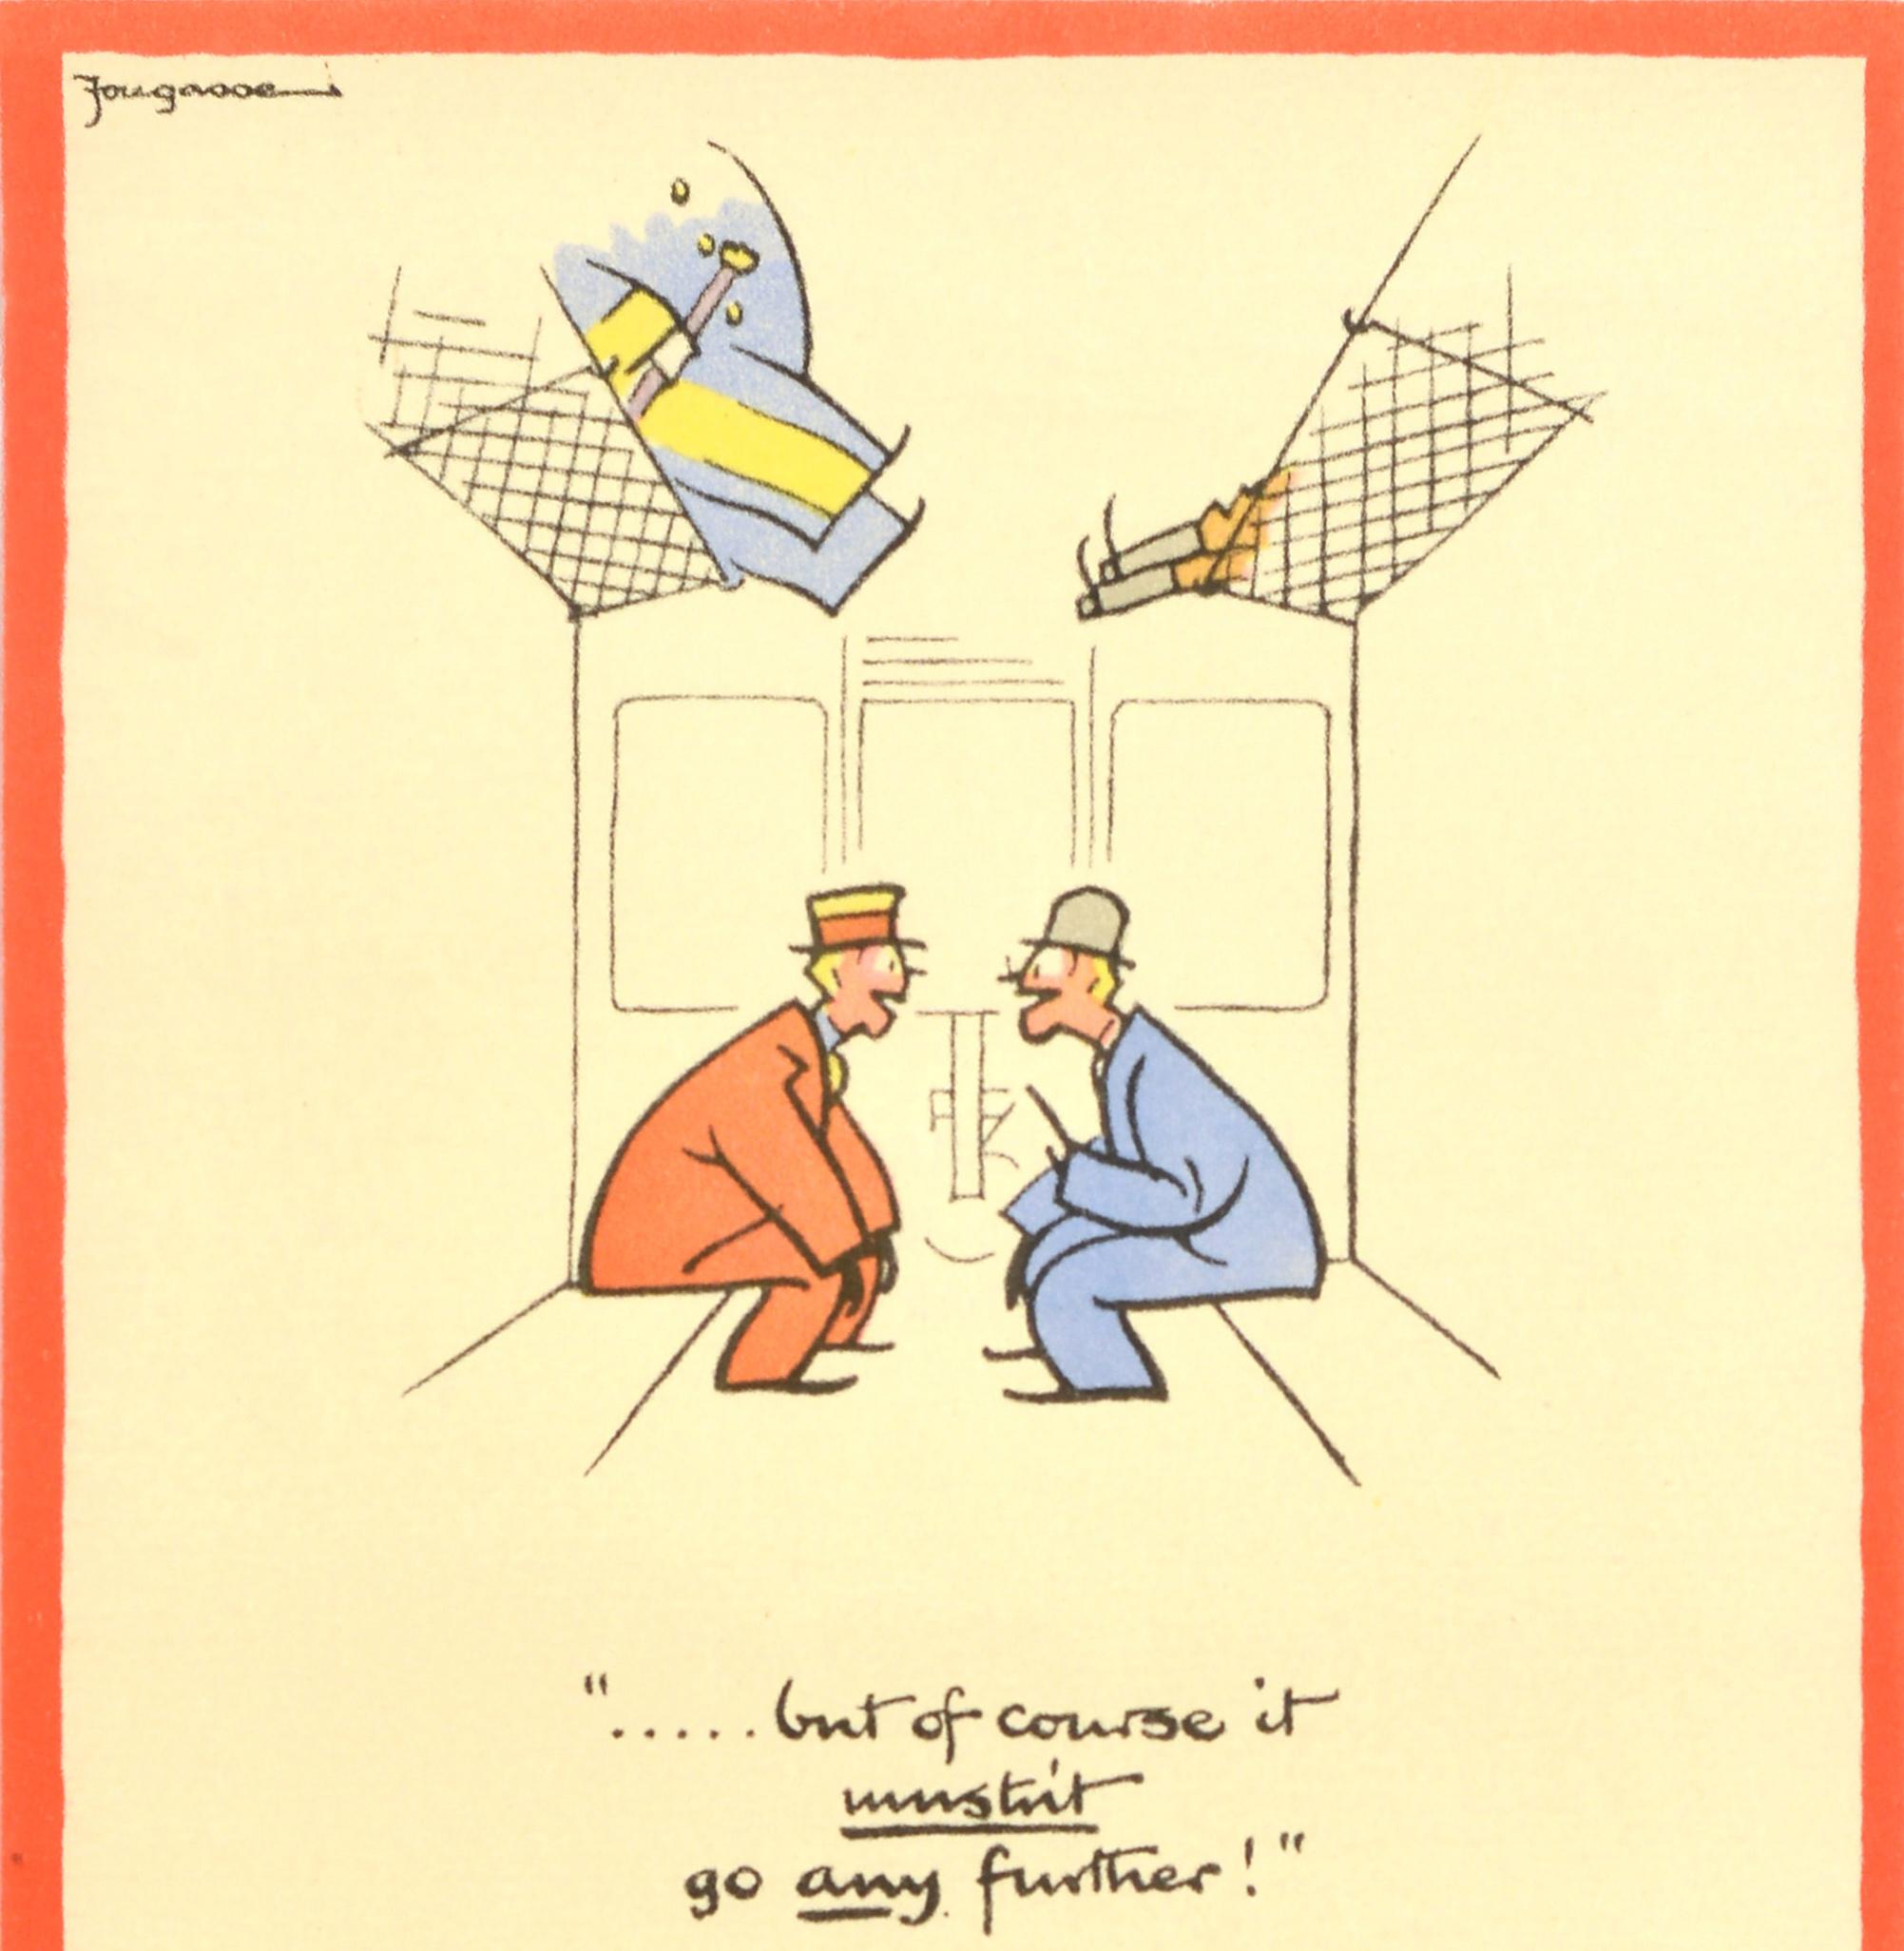 Original vintage World War Two poster by the notable British cartoonist and illustrator, Fougasse (Cyril Kenneth Bird; 1887-1965). This is one of the posters from the popular Careless Talk Costs Lives wartime propaganda series issued by the Ministry